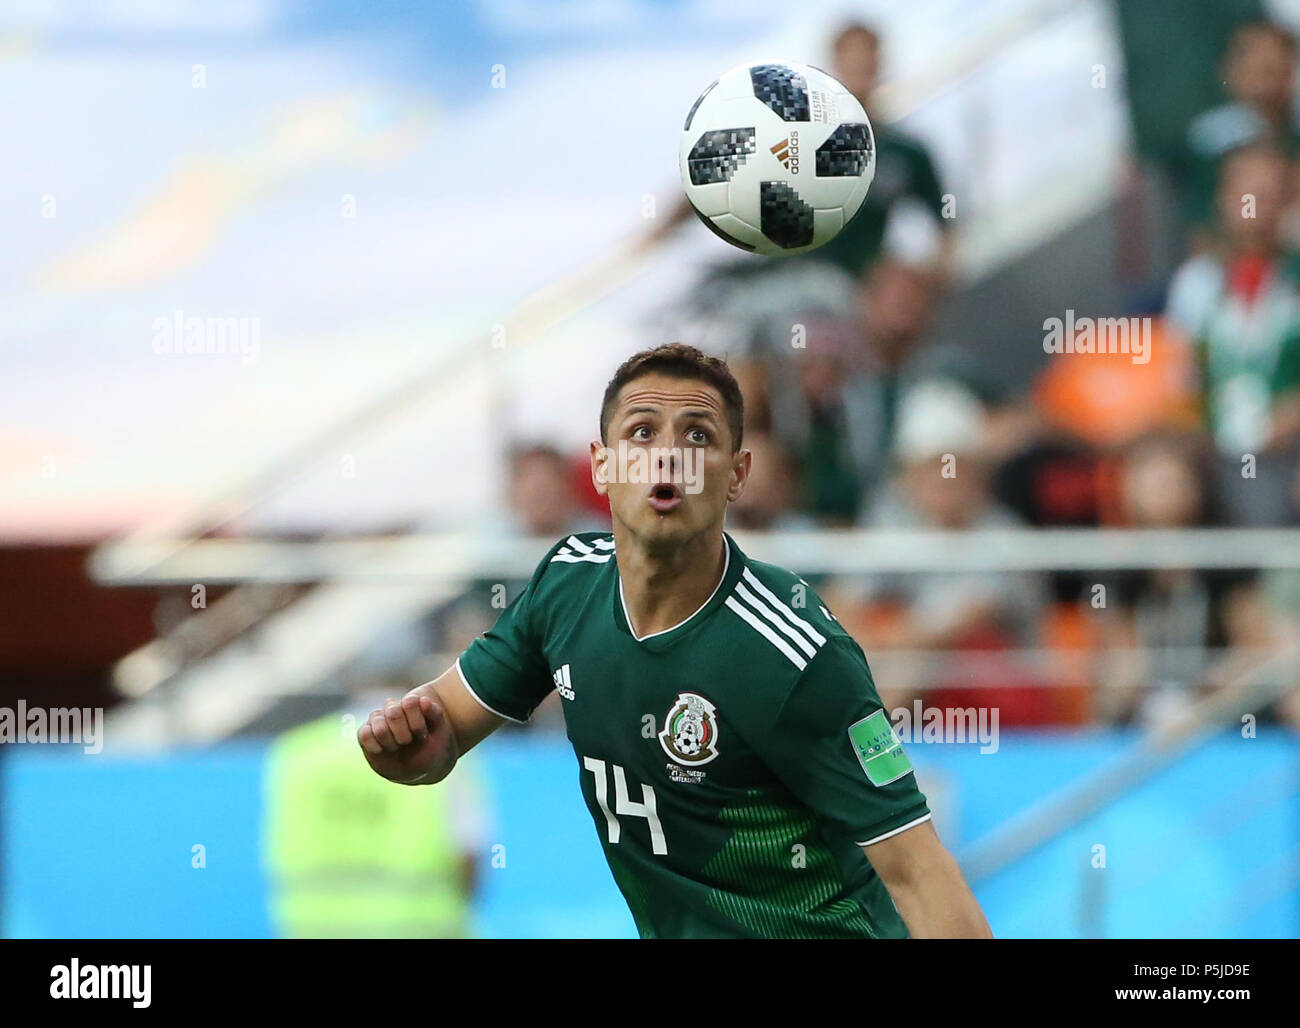 Yekaterinburg, Russia. 27th June, 2018. Javier Hernandez of Mexico competes during the 2018 FIFA World Cup Group F match between Mexico and Sweden in Yekaterinburg, Russia, June 27, 2018. Credit: Li Ming/Xinhua/Alamy Live News Stock Photo